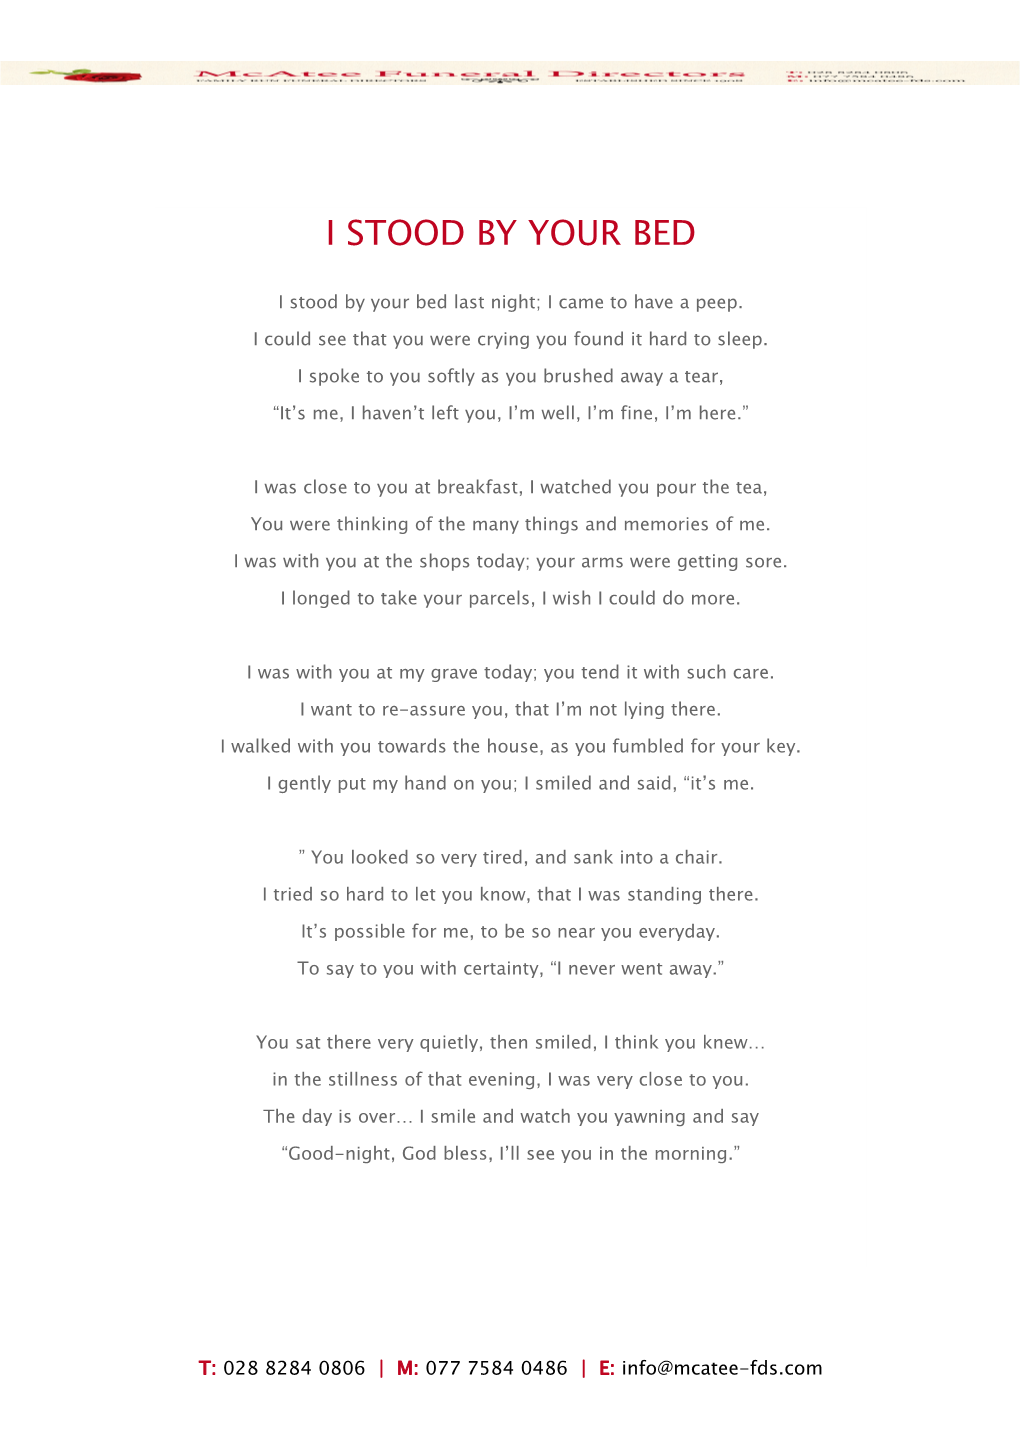 I Stood by Your Bed